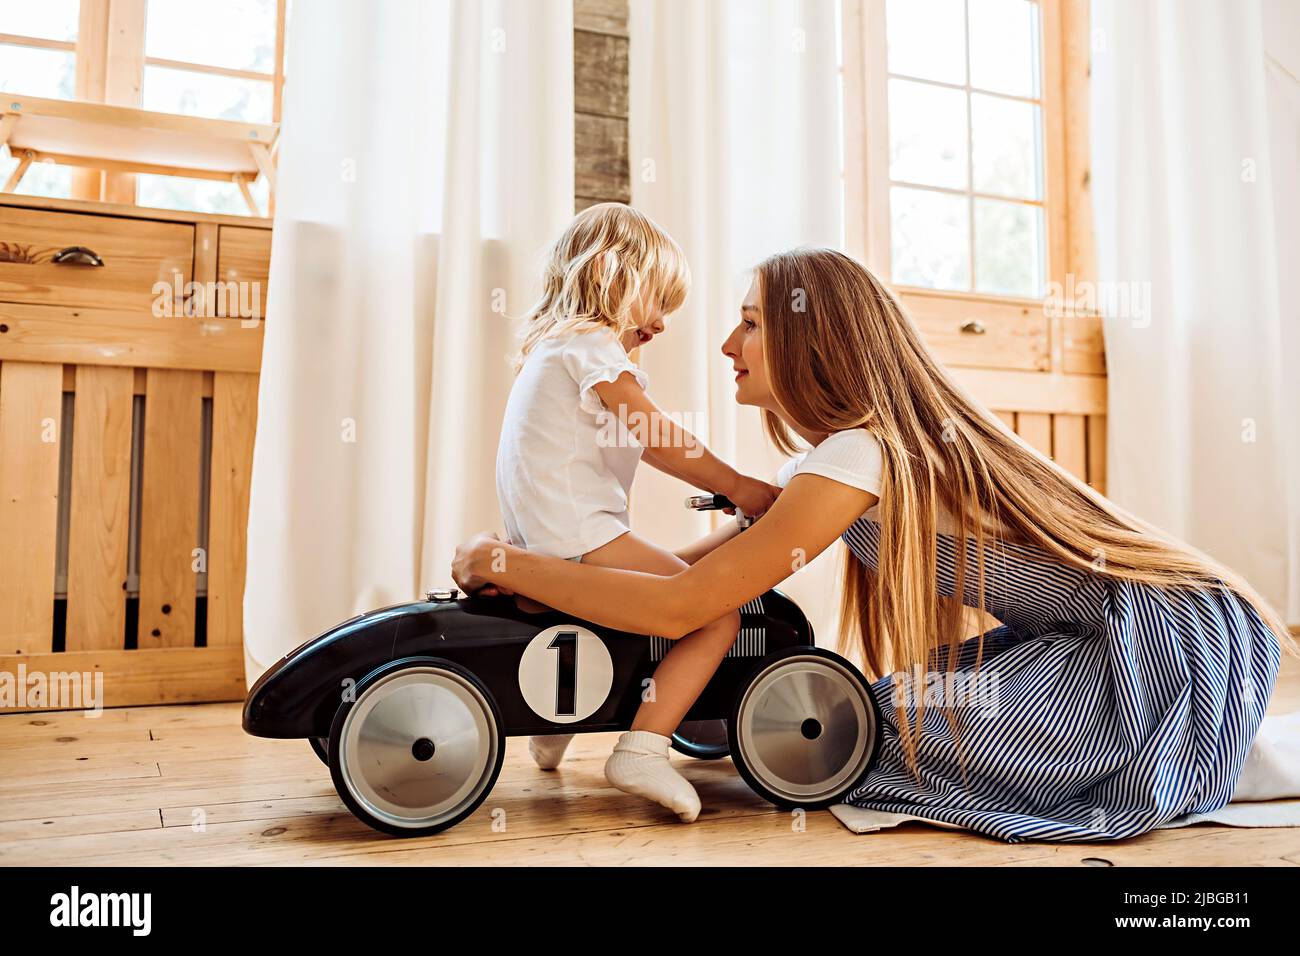 A young mother hugs her little daughter while playing at home. Family leisure lifestyle image Stock Photo